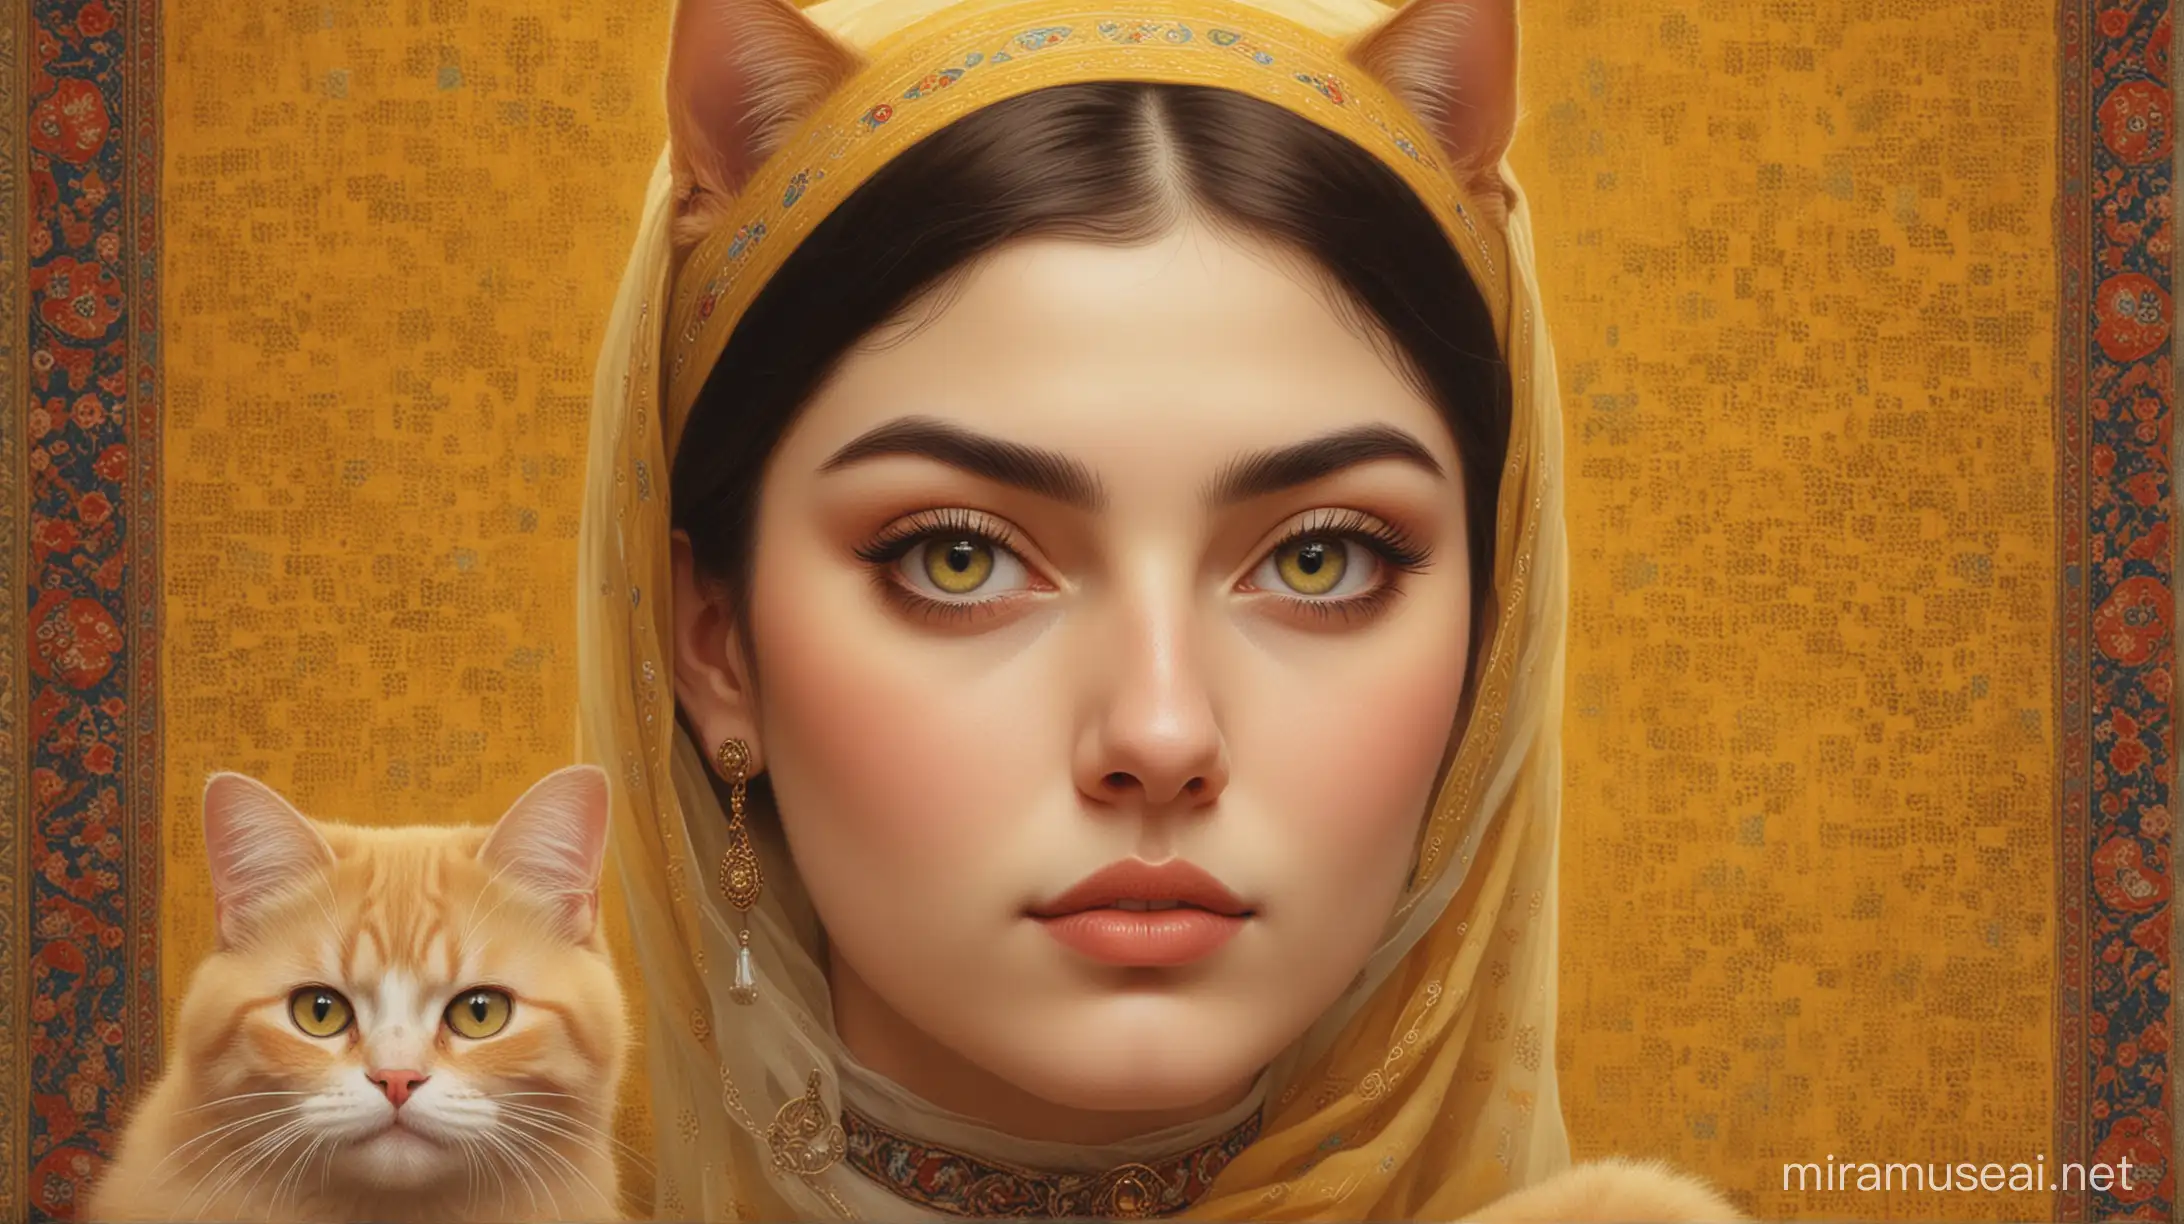 persian qajar girl,yellow persian carpet in back ground beautiful and judgemental, cat-treats paradise, cateyes, artcollage, artsy, evocative, gradients, colorful-light, detailed face, detailed, art by franz stuck, art by sungmoo heo, art by grace aldrich, art by tom bagshaw, art by aykut aydogdu, yuri shwedoff,